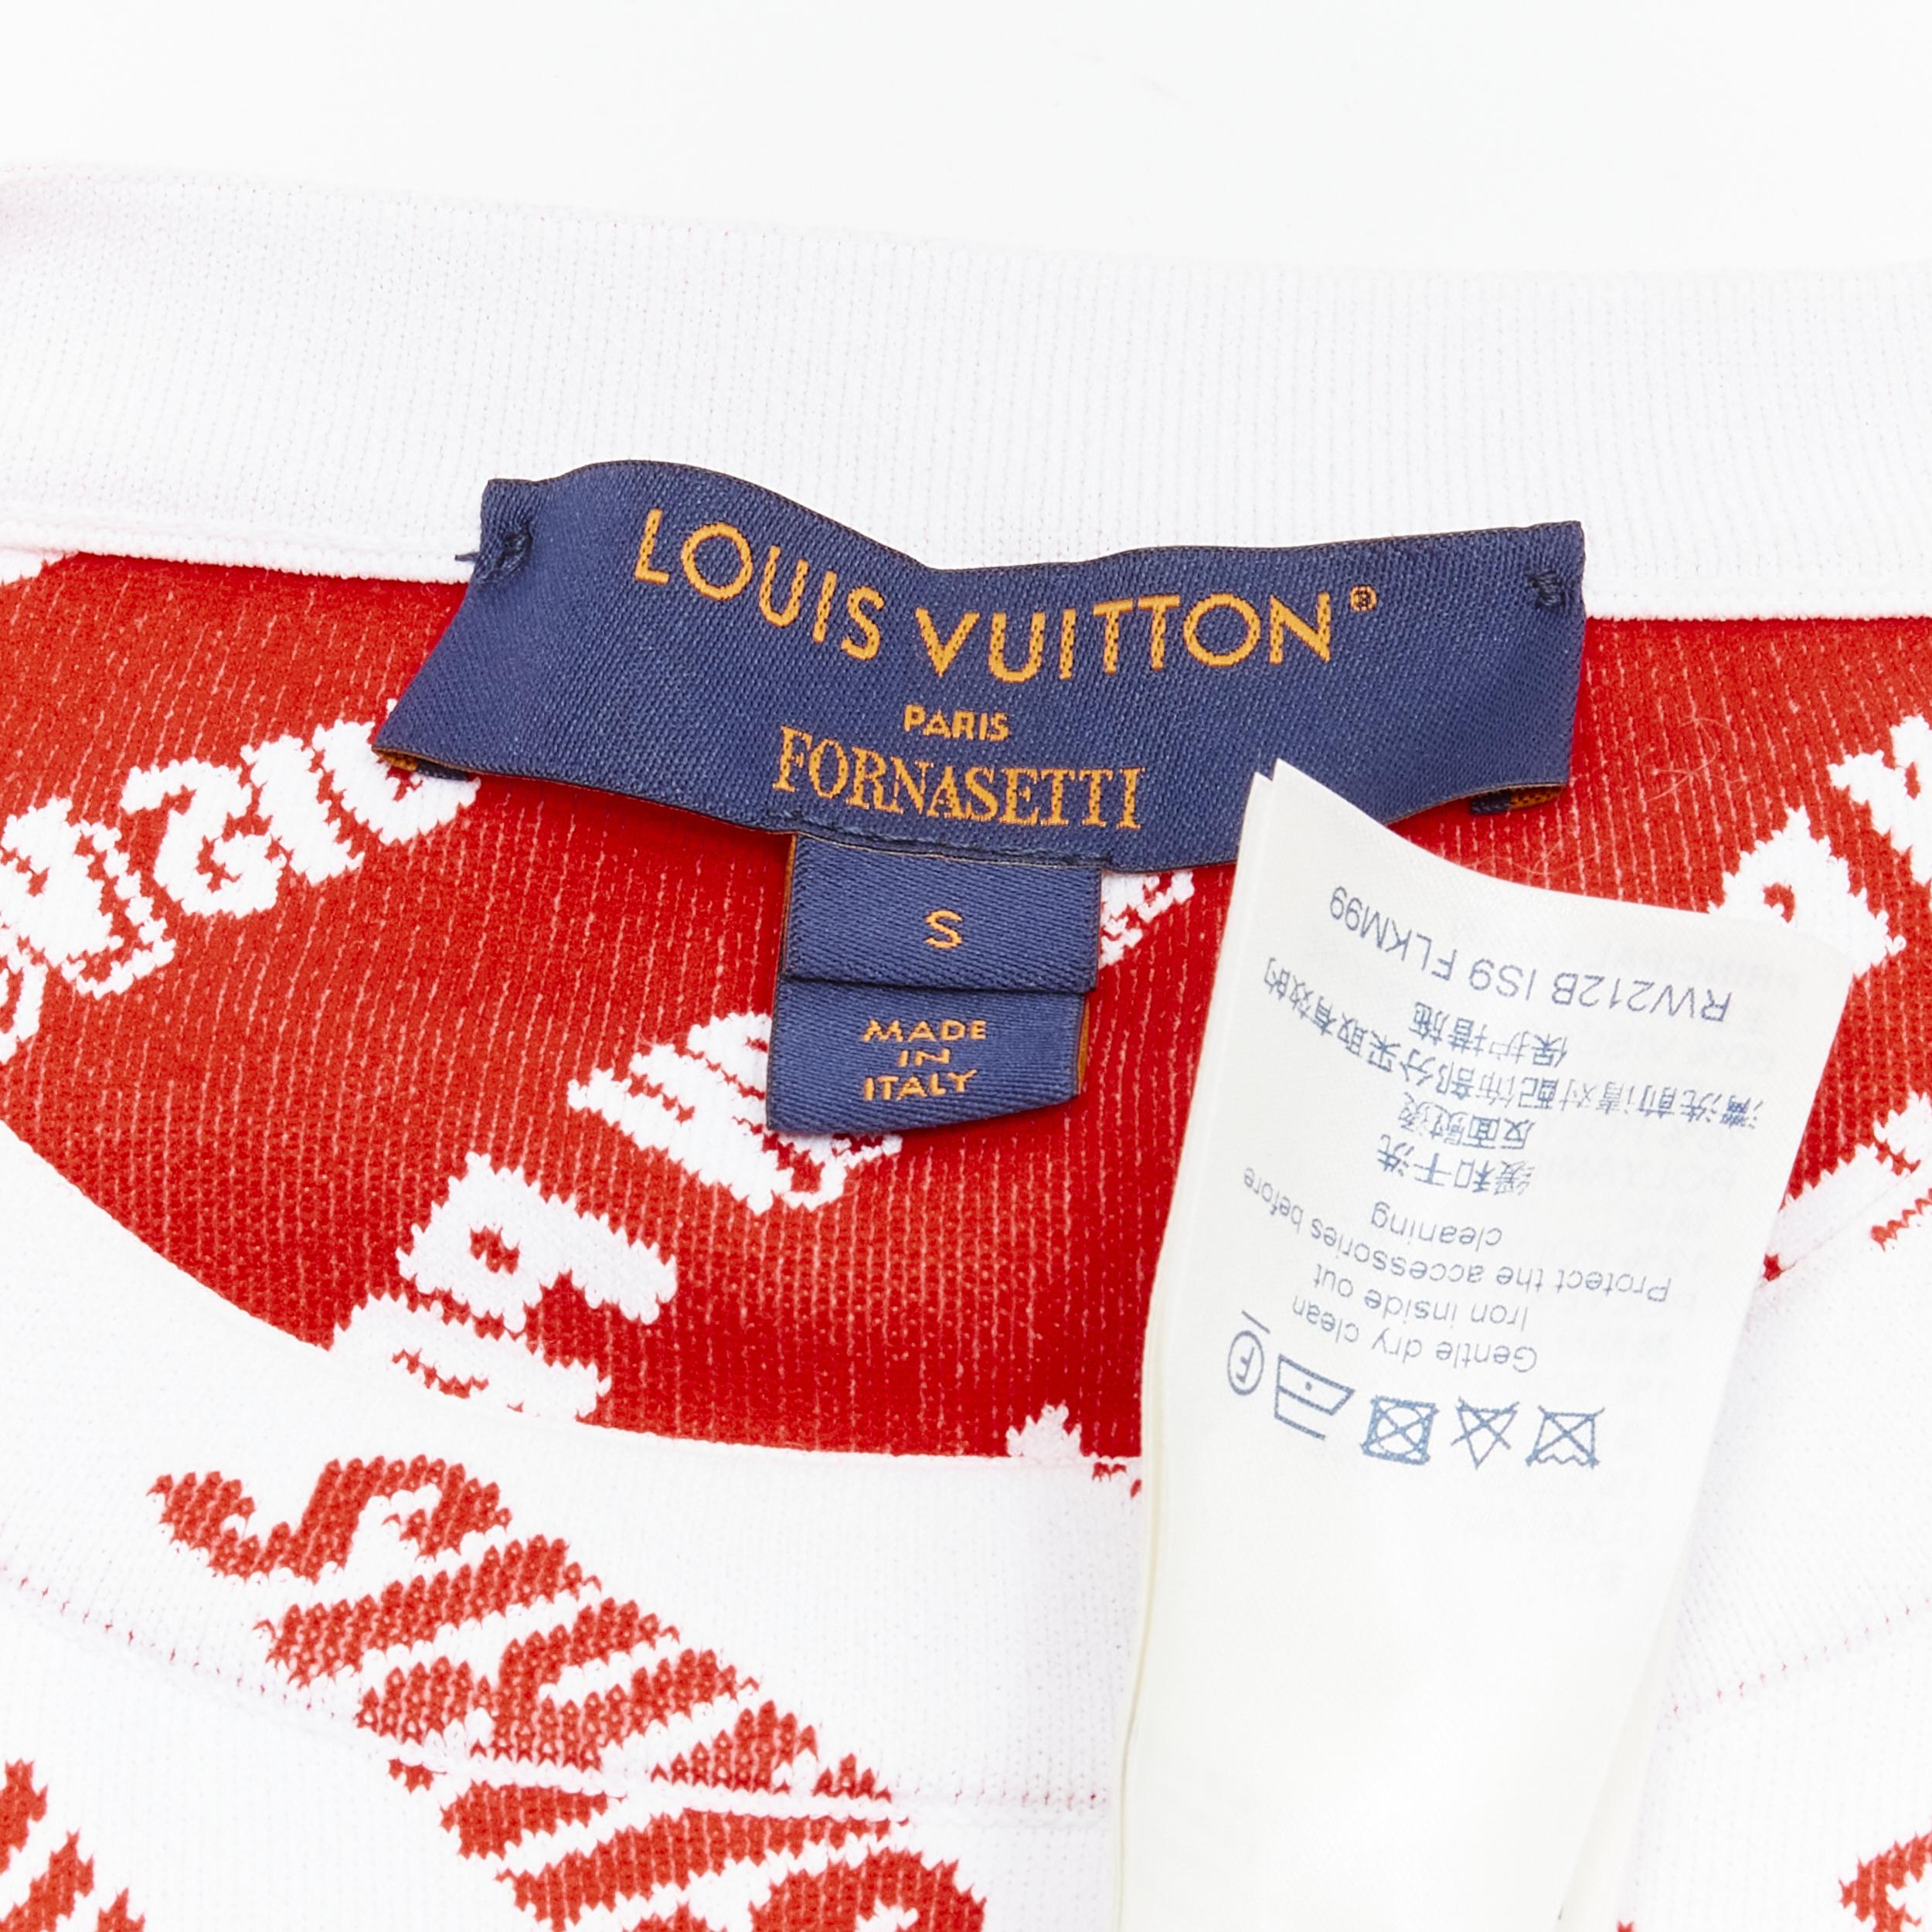 LOUIS VUITTON FORNASETTI 2021 Statue white red logo jacquard boxy knit top S For Sale 1